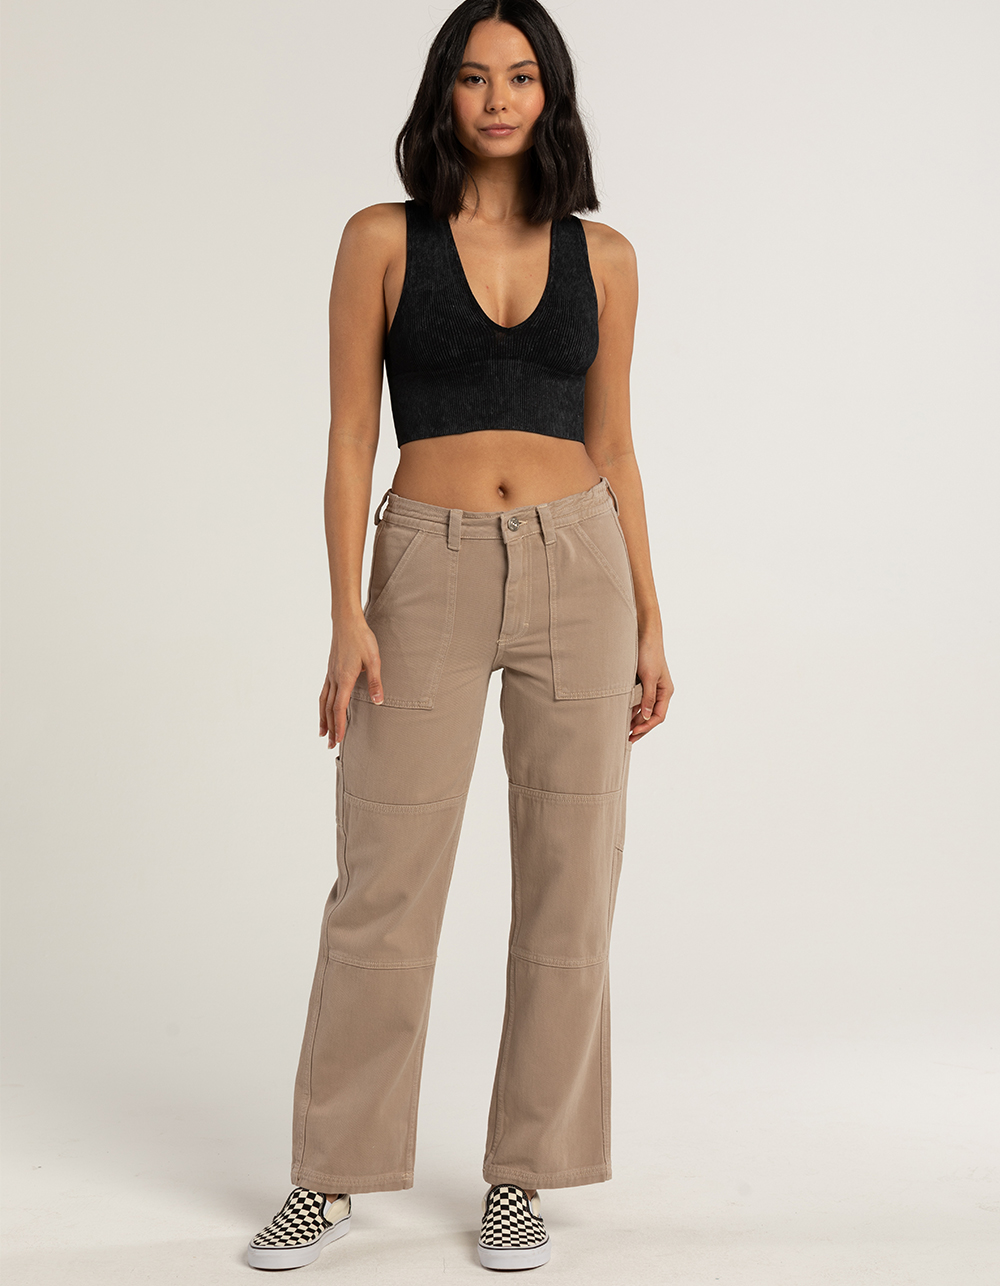 BDG Urban Outfitters Womens Cargo Skate Pants